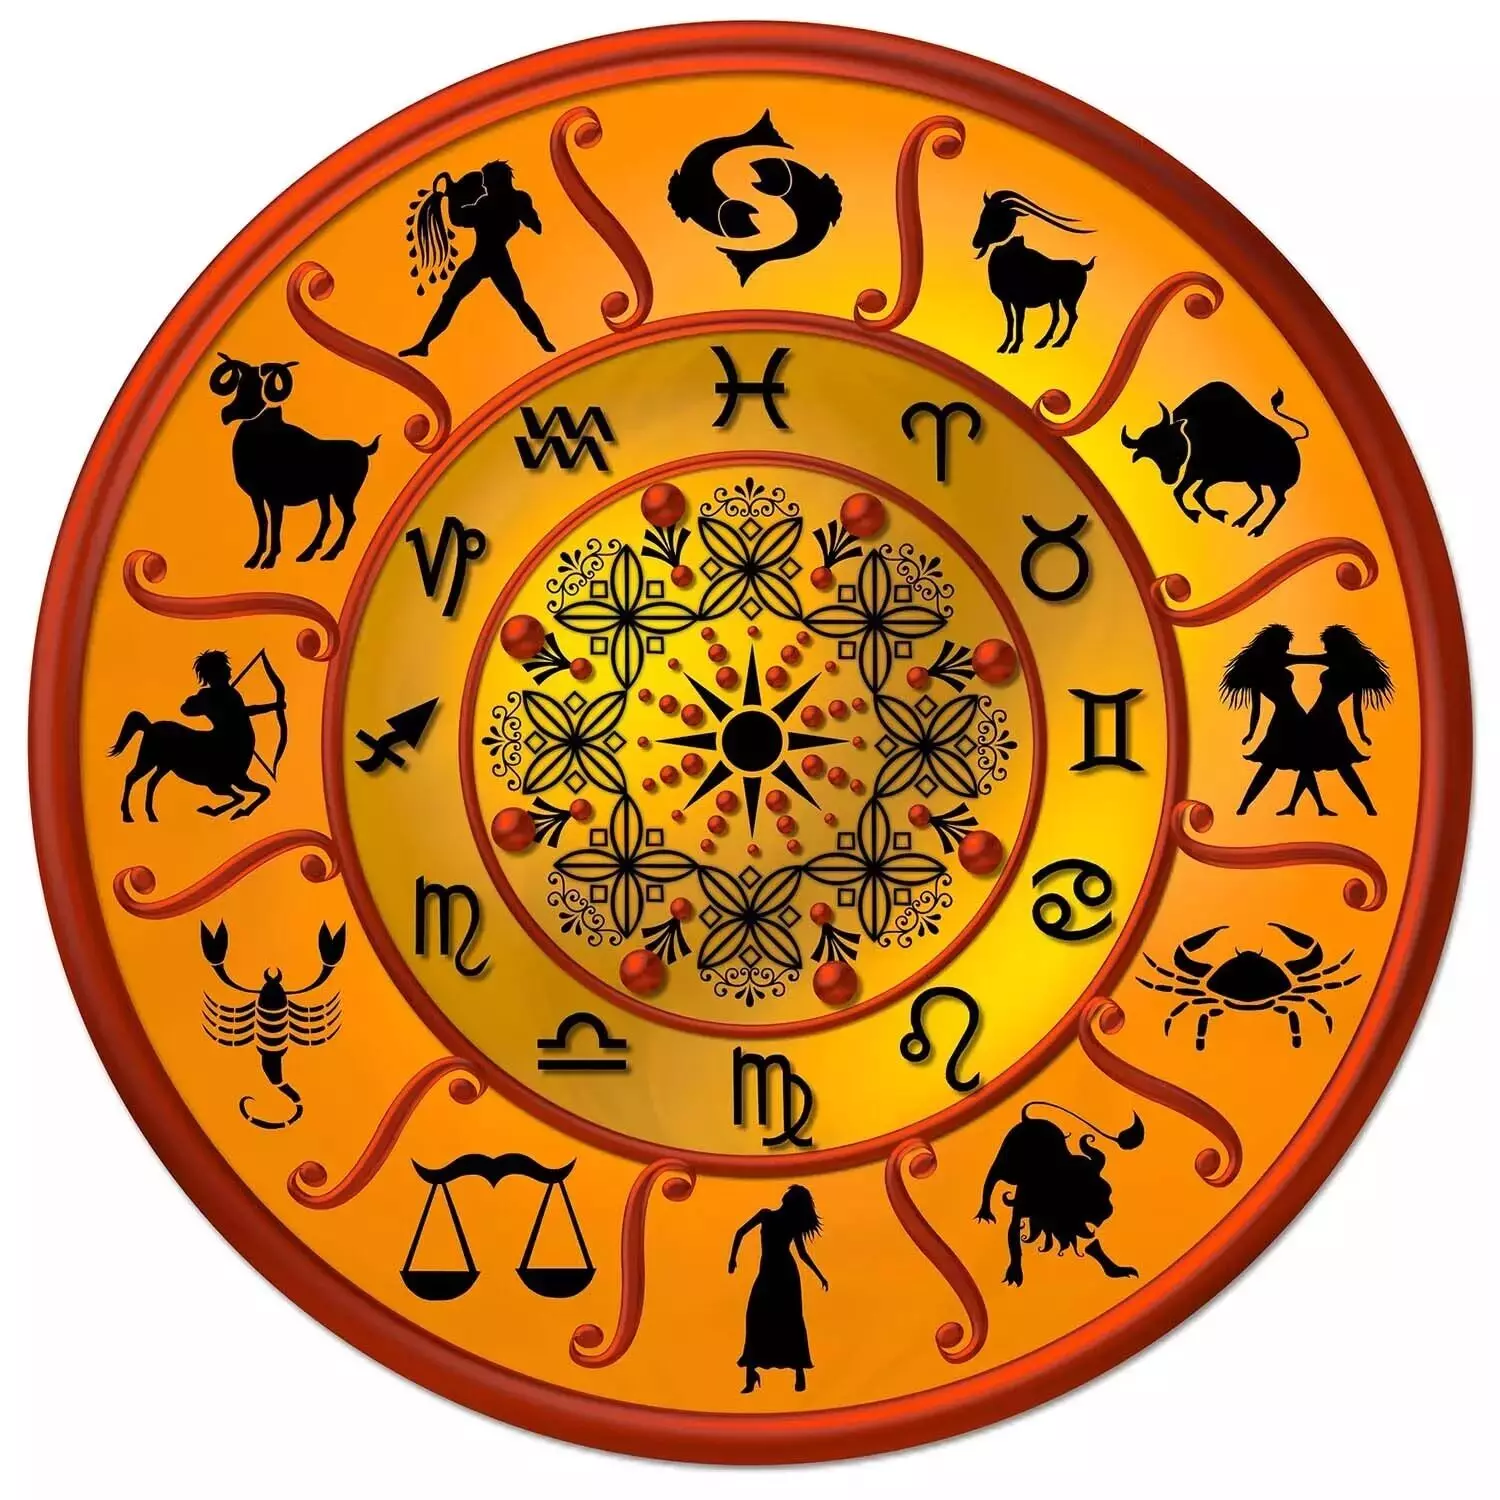 29 August  – Know your todays horoscope